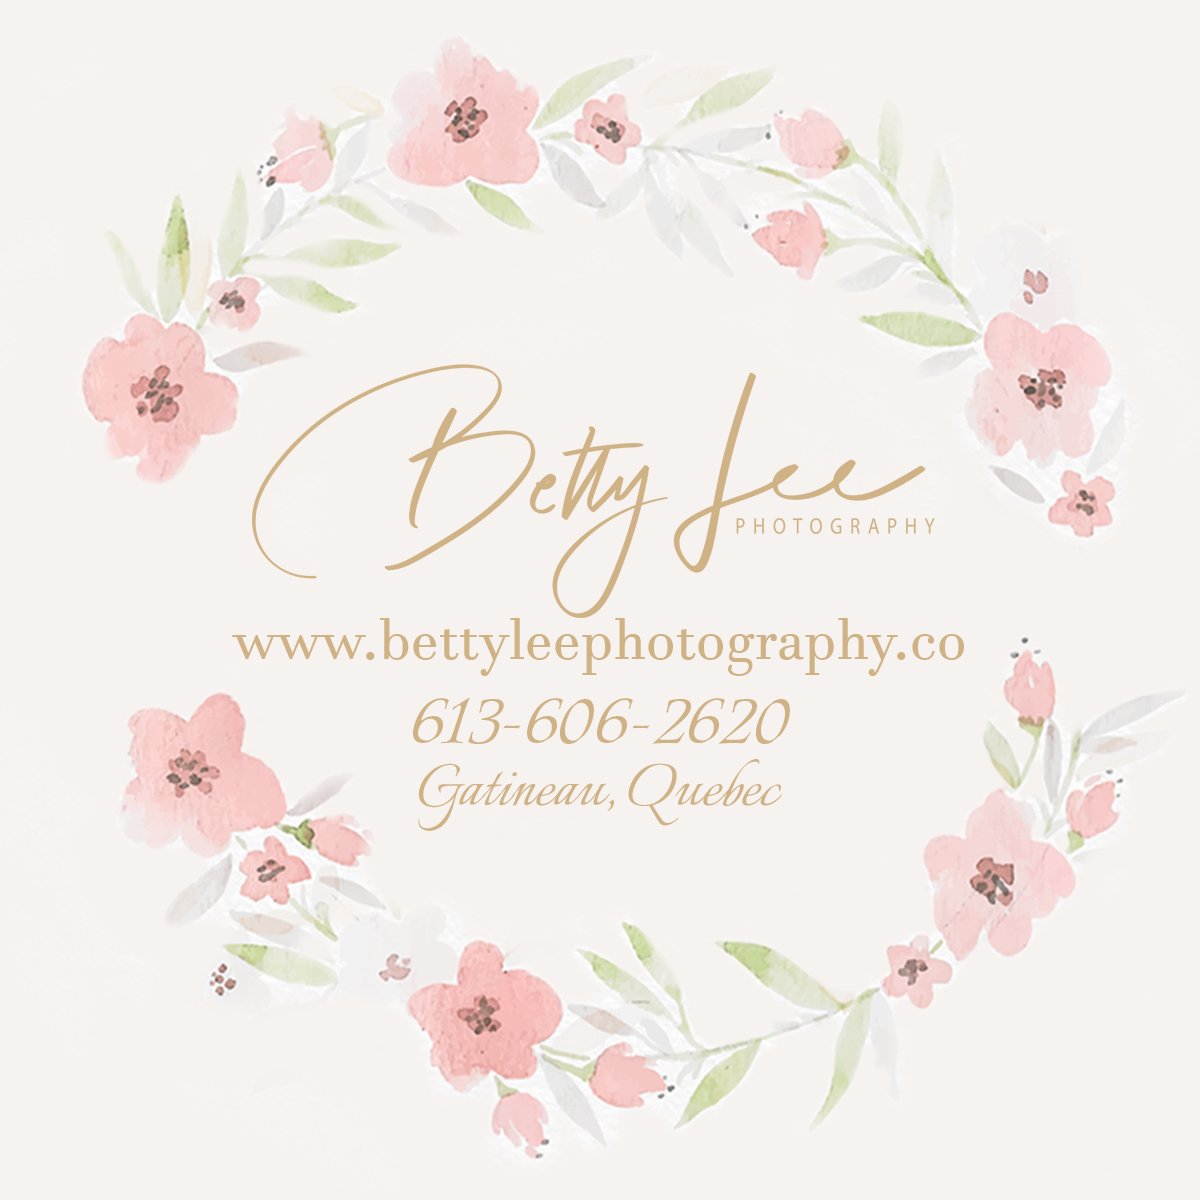 Betty Lee Photography